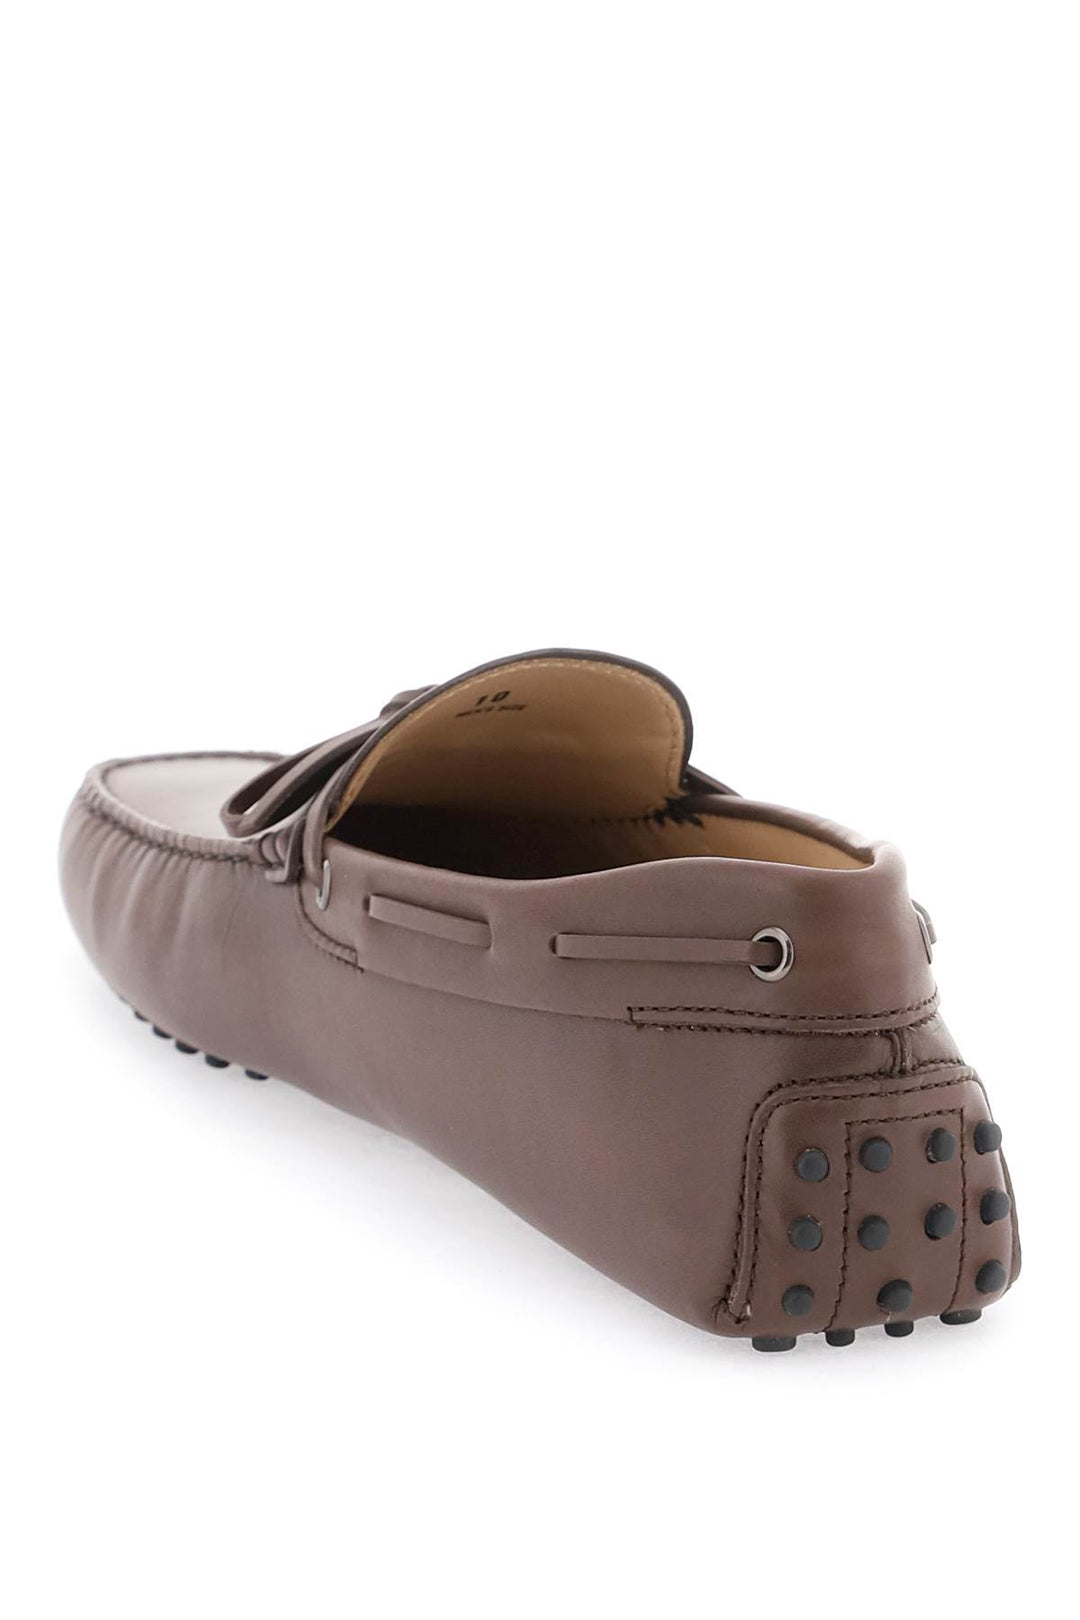 Tod's 'City Gommino' Loafers   Brown